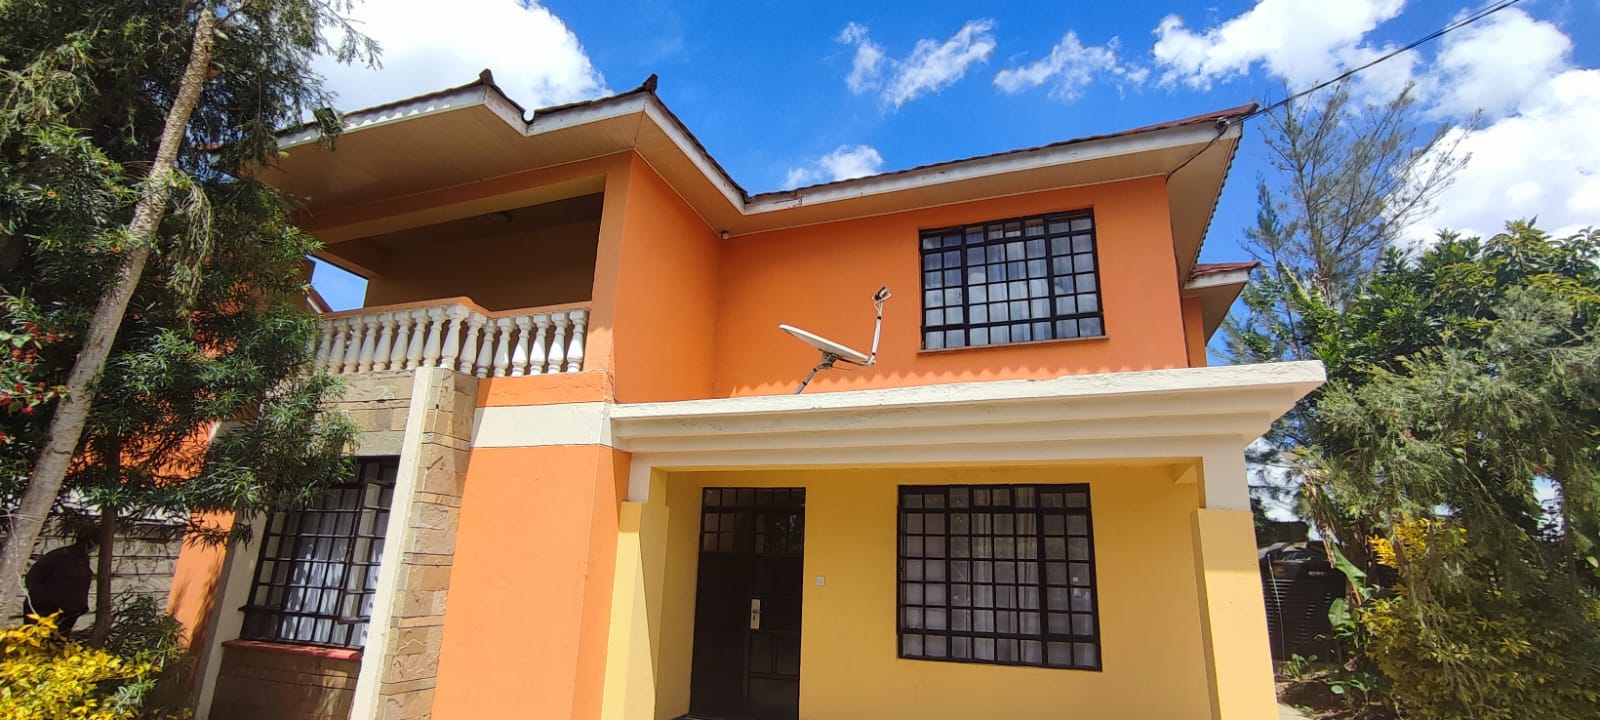 4br corner house all ensuite with dsq.. Gated community of 5 units each on 50*100 Yukos estate Kitengela behind total. Just 500m off the highway. Price 10 M Musilli Homes